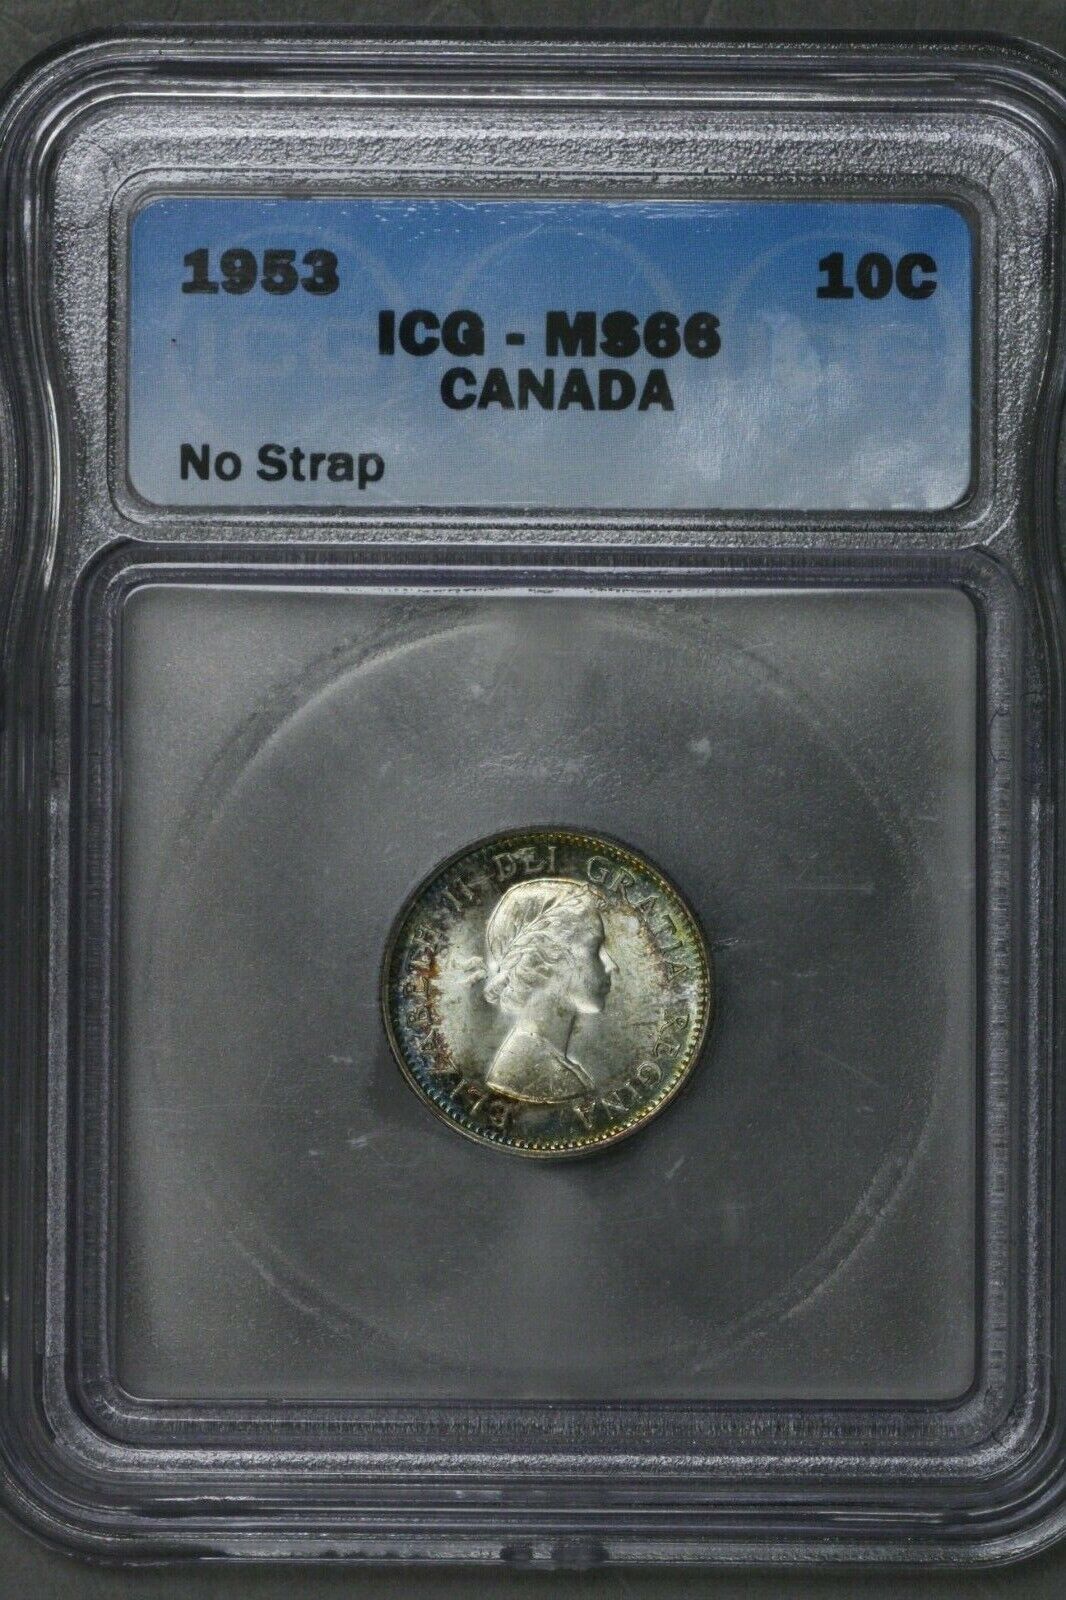 Canada （お得な特別割引価格） 1953 10 Cents NGC MS S385 Strap No Colorful 66 2021人気の